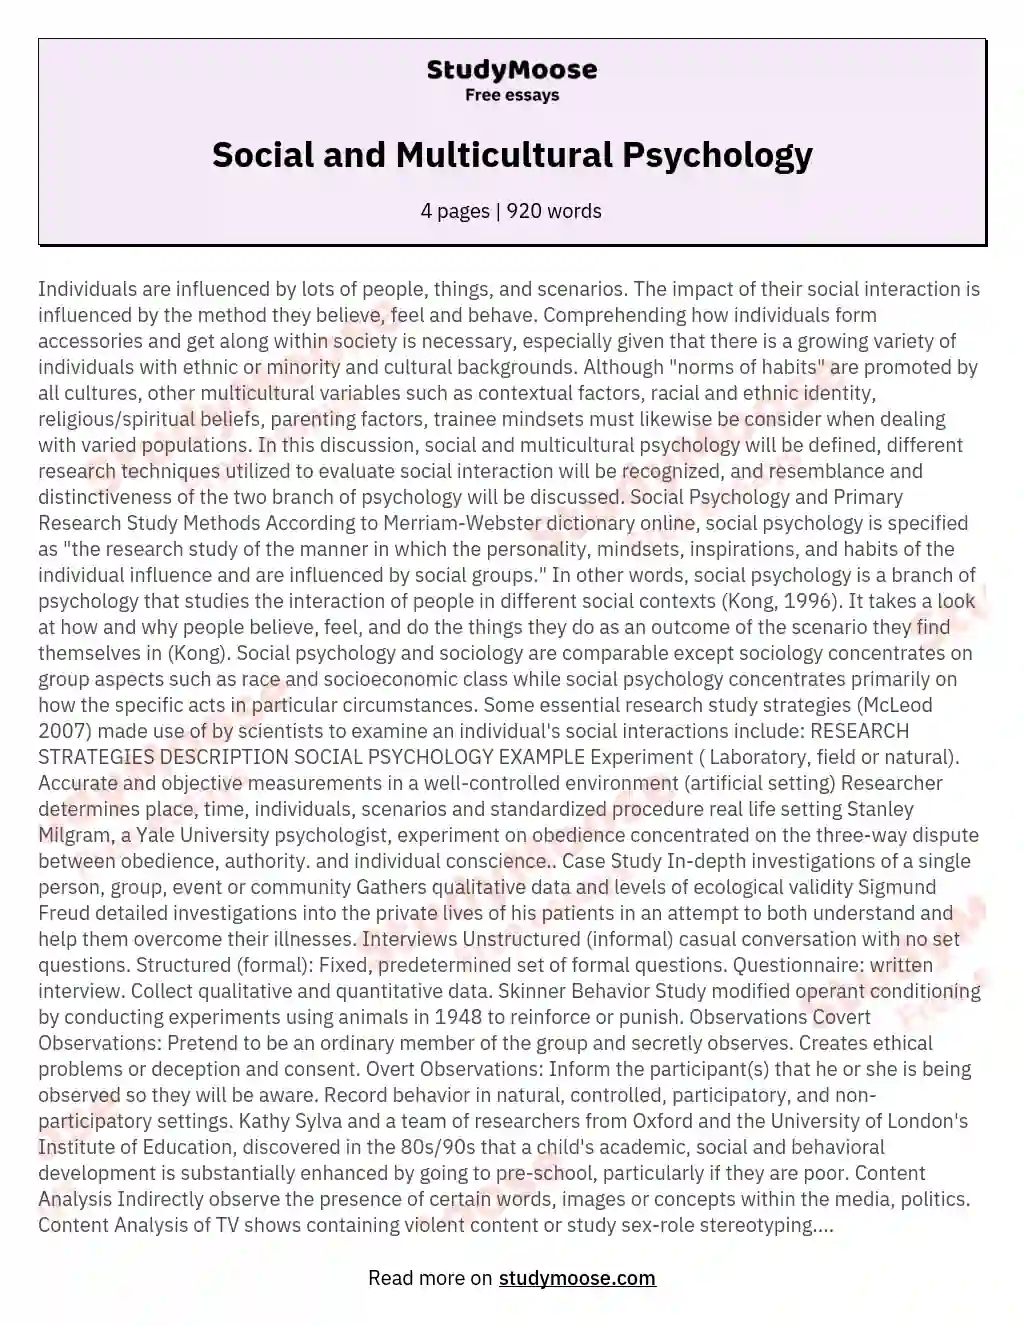 Social and Multicultural Psychology essay